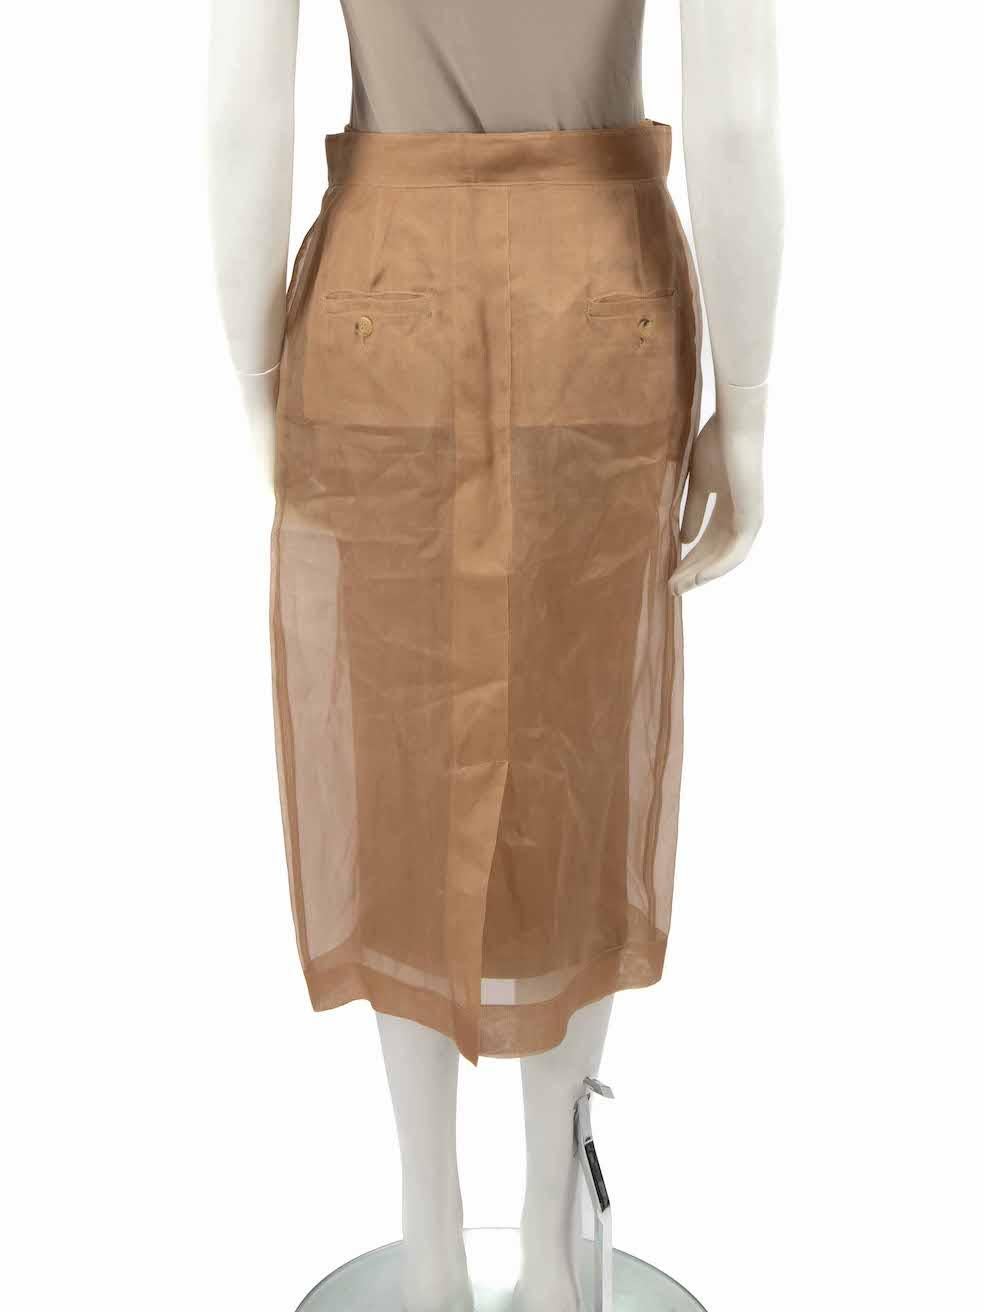 Max Mara Beige Sheer Midi Skirt Size M In Good Condition For Sale In London, GB